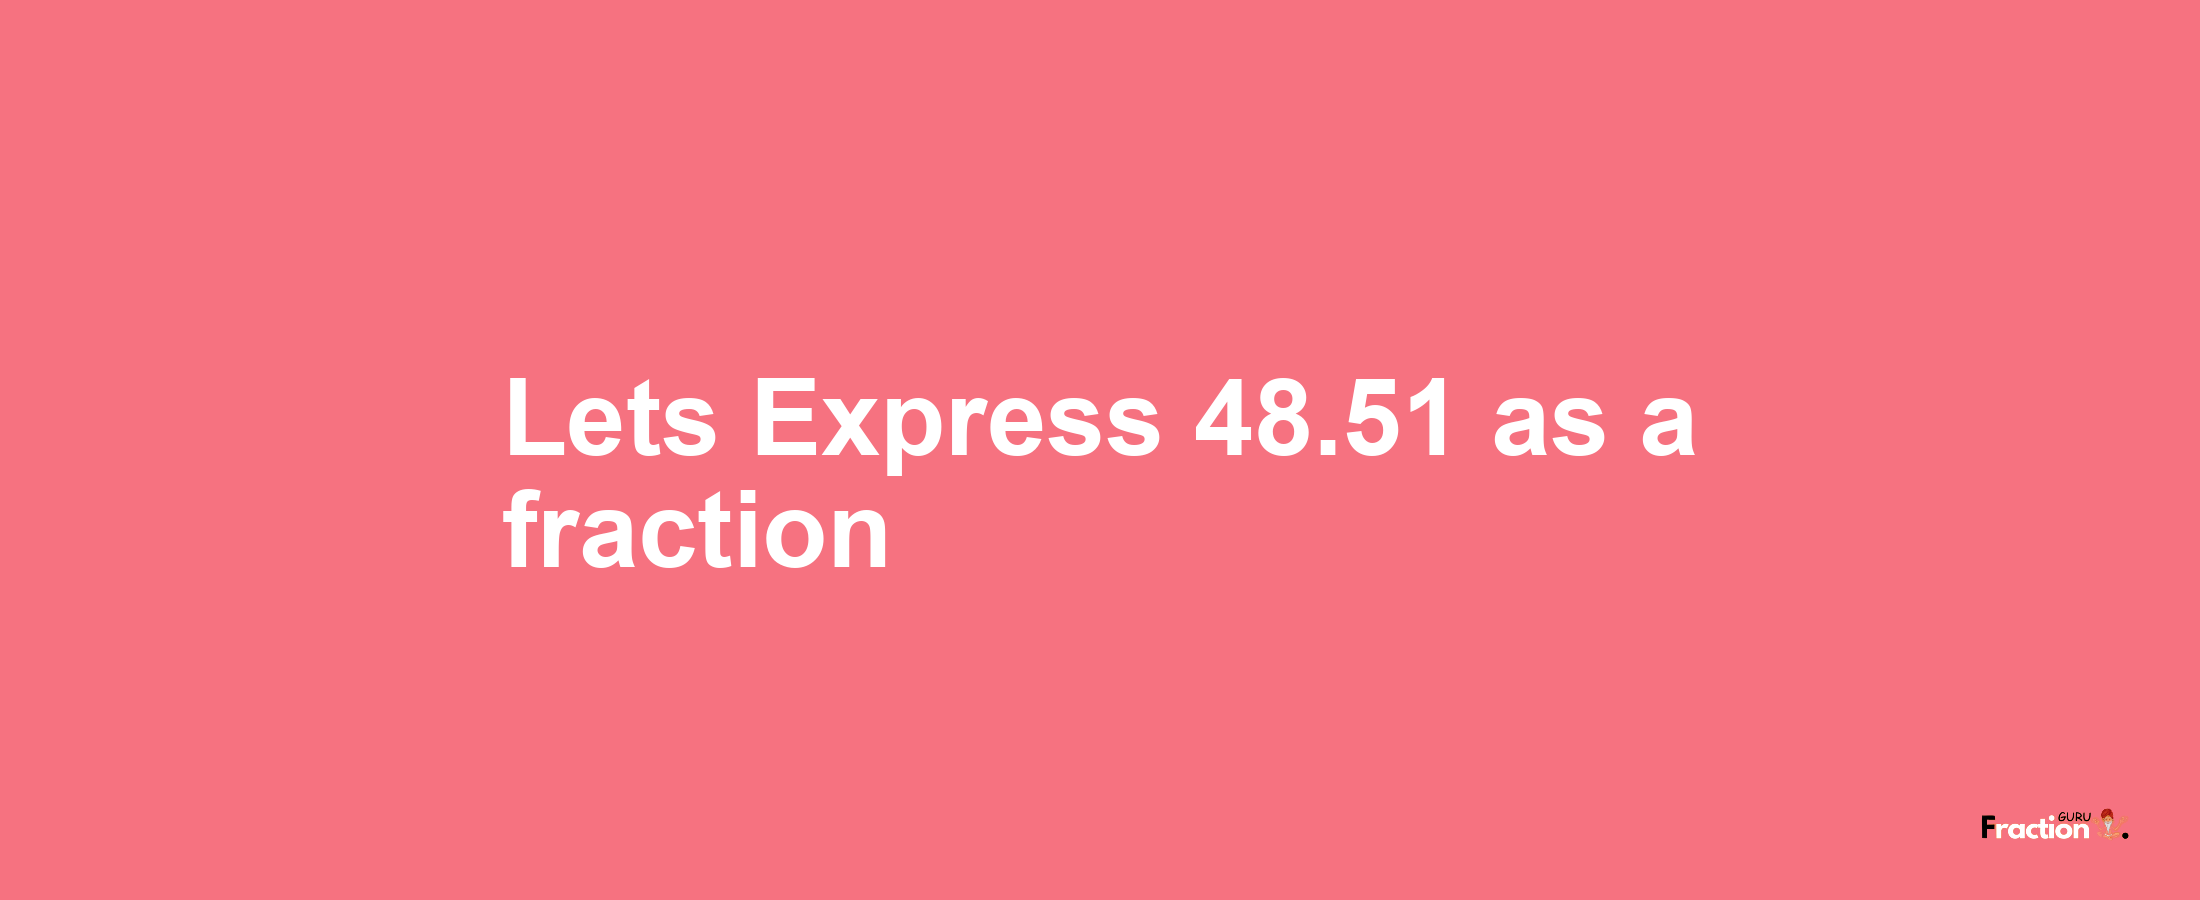 Lets Express 48.51 as afraction